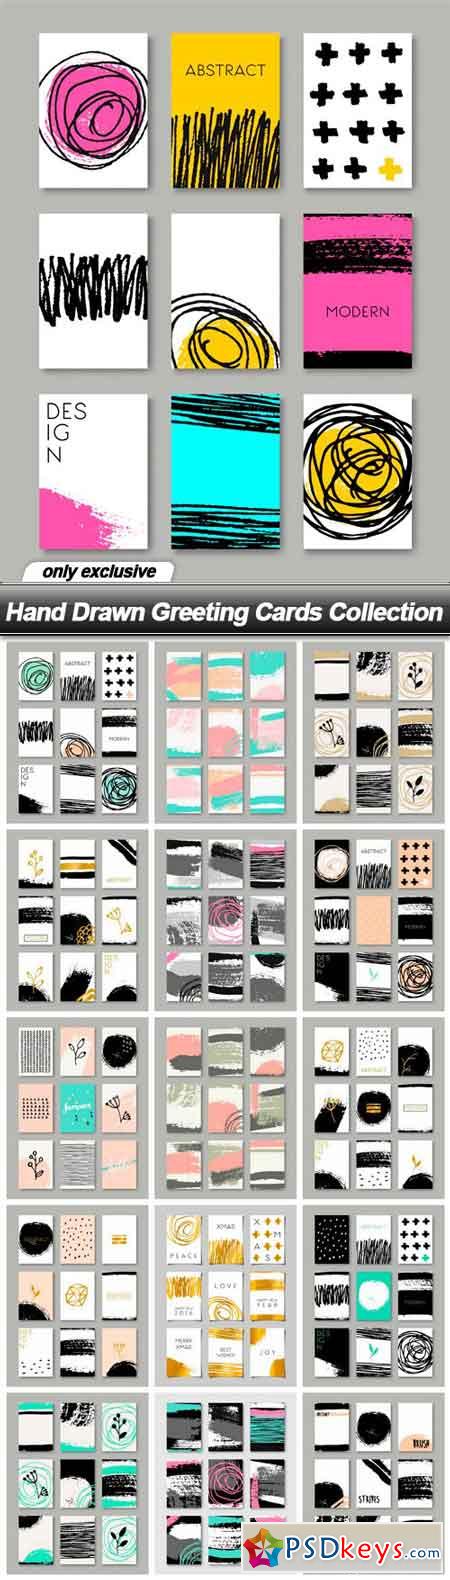 Hand Drawn Greeting Cards Collection - 16 EPS